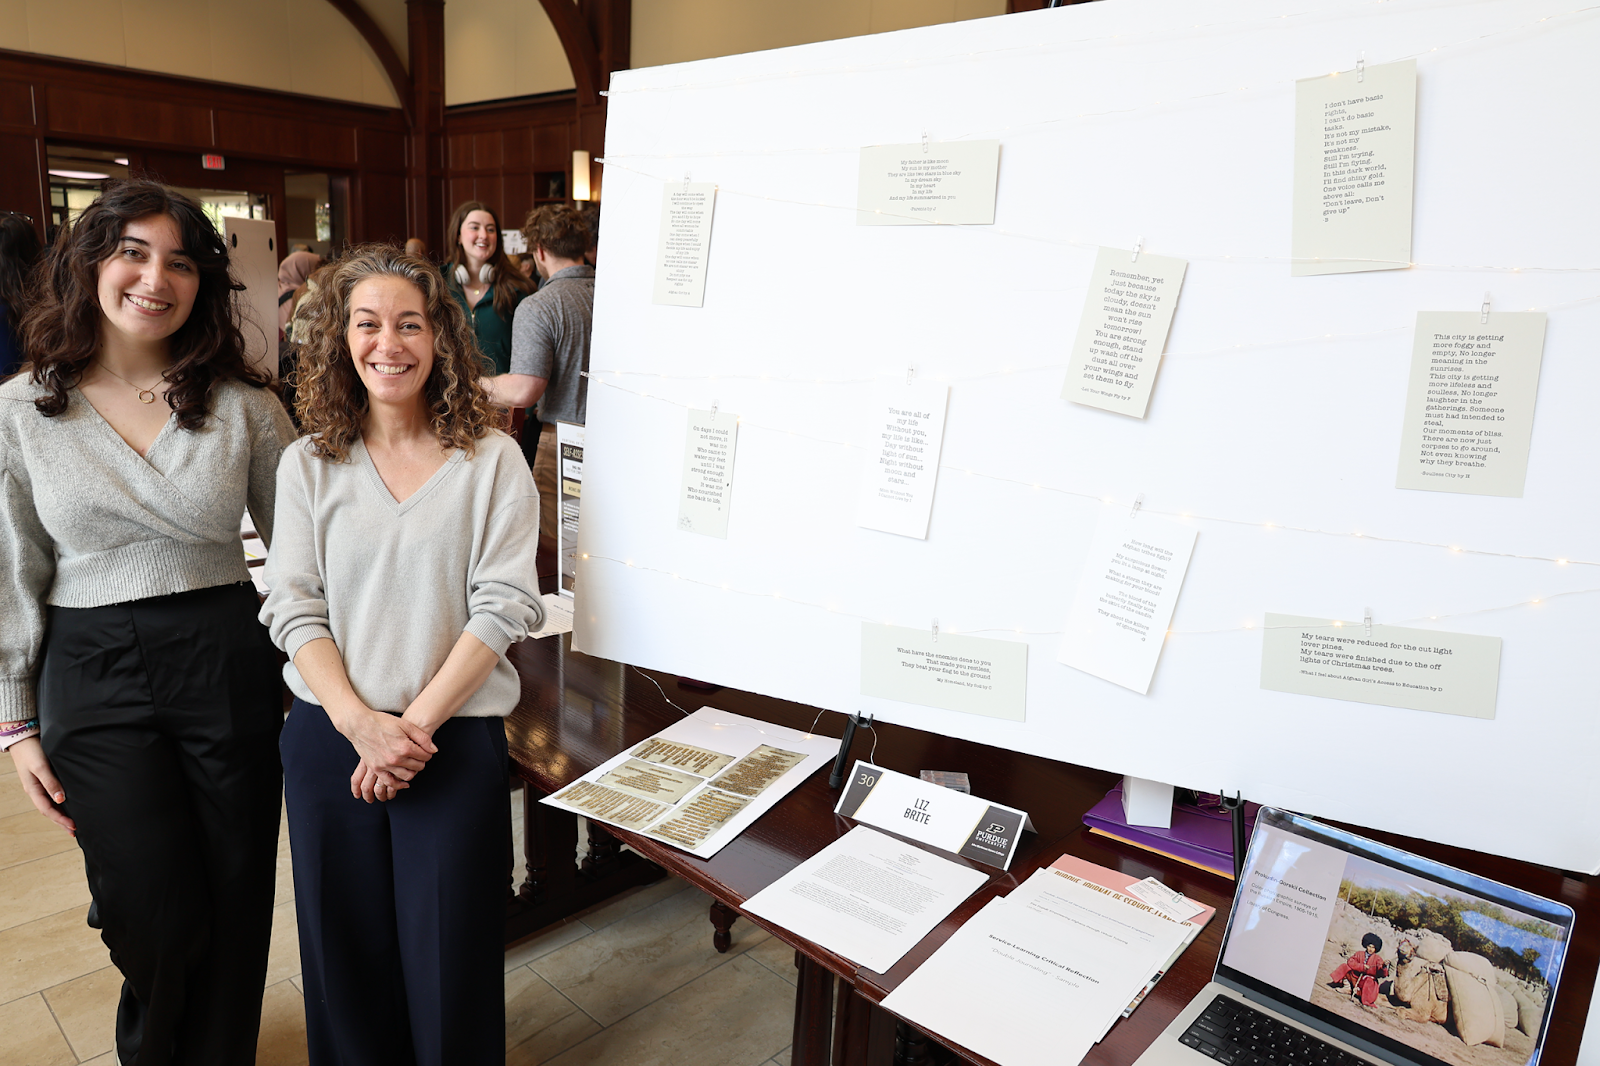 Liz Brite (right) stands next to her poster with poems her students collected as part of her course HONR 399: Beyond Afghanistan.